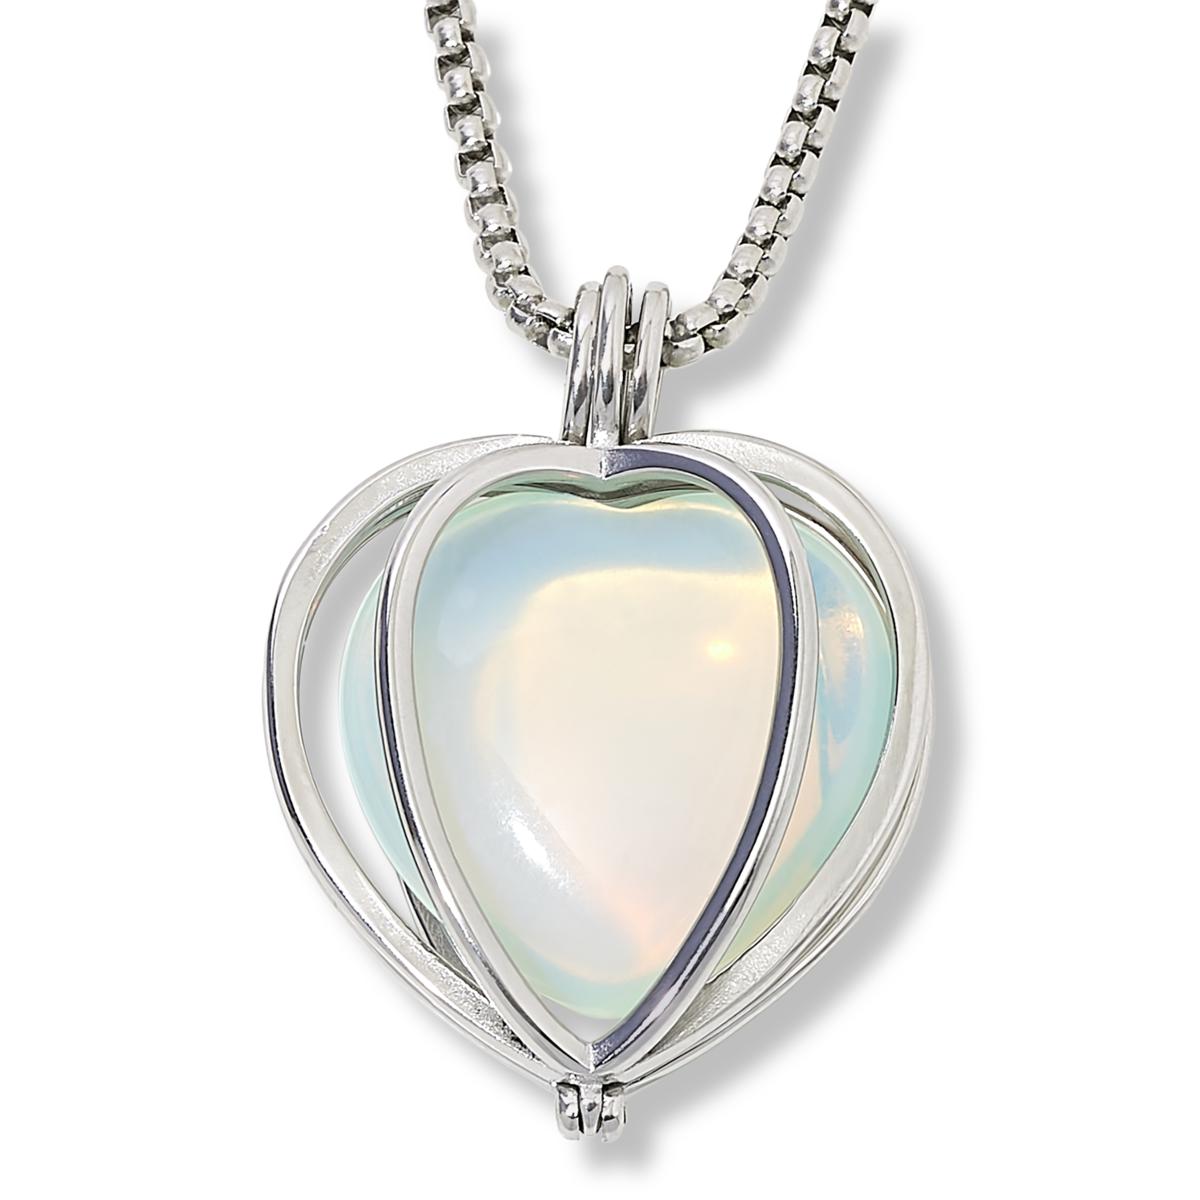 Stainless Steel Convertible Heart Locket with Chakra Gemstones | Adjustable Bolo Chain | 30"